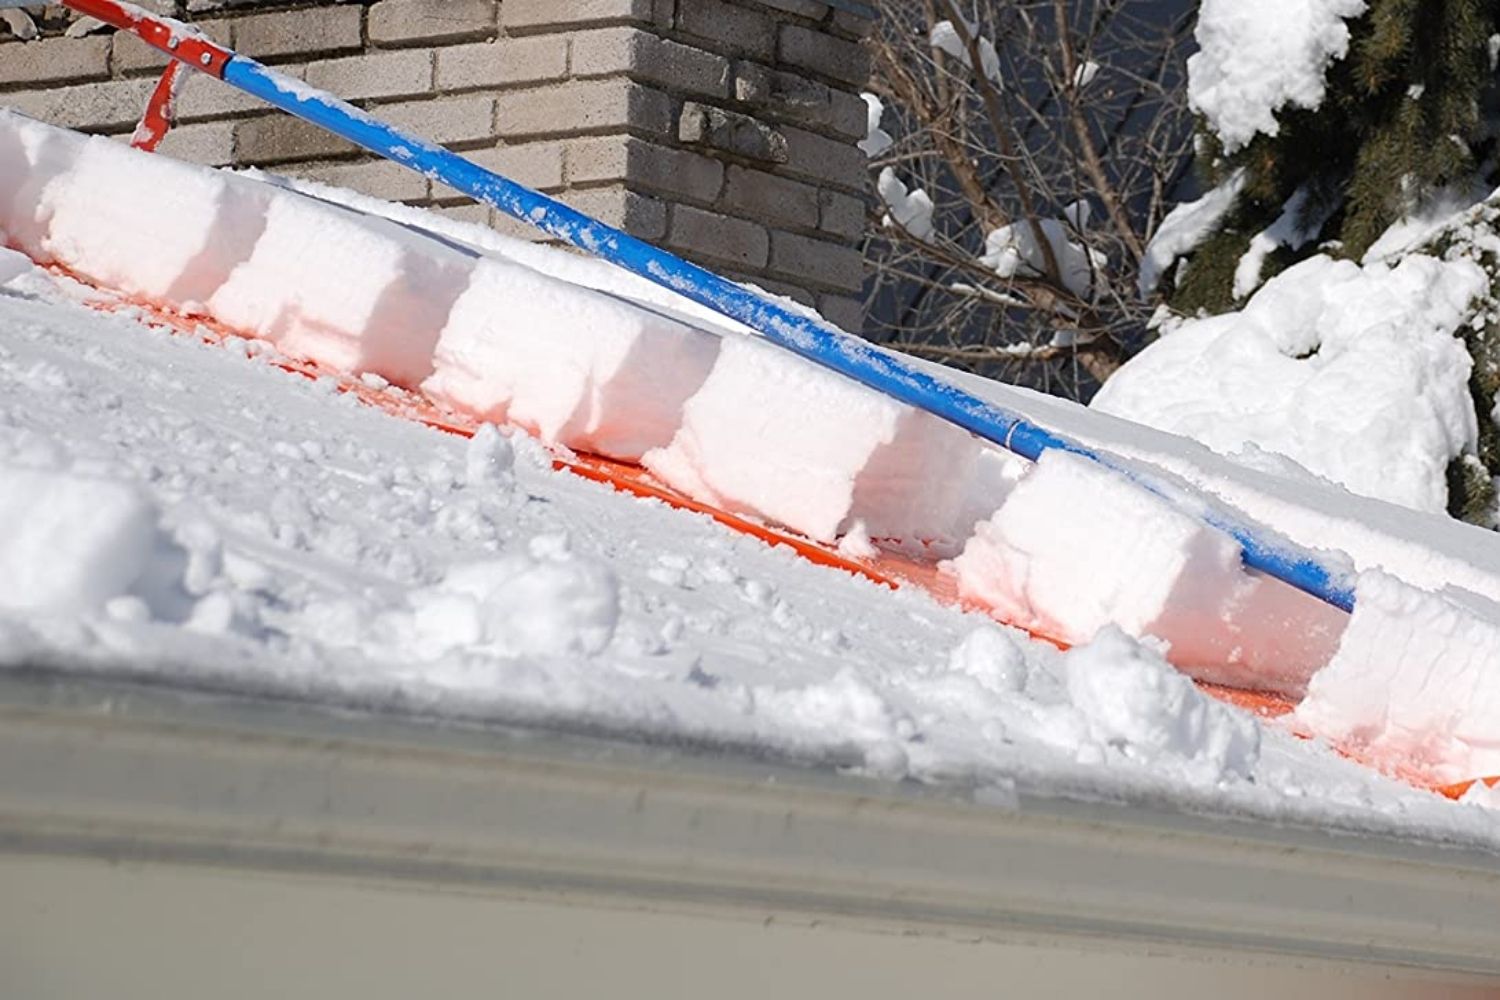 The best roof rake in action breaking a large block of roof snow into smaller segments for removal.